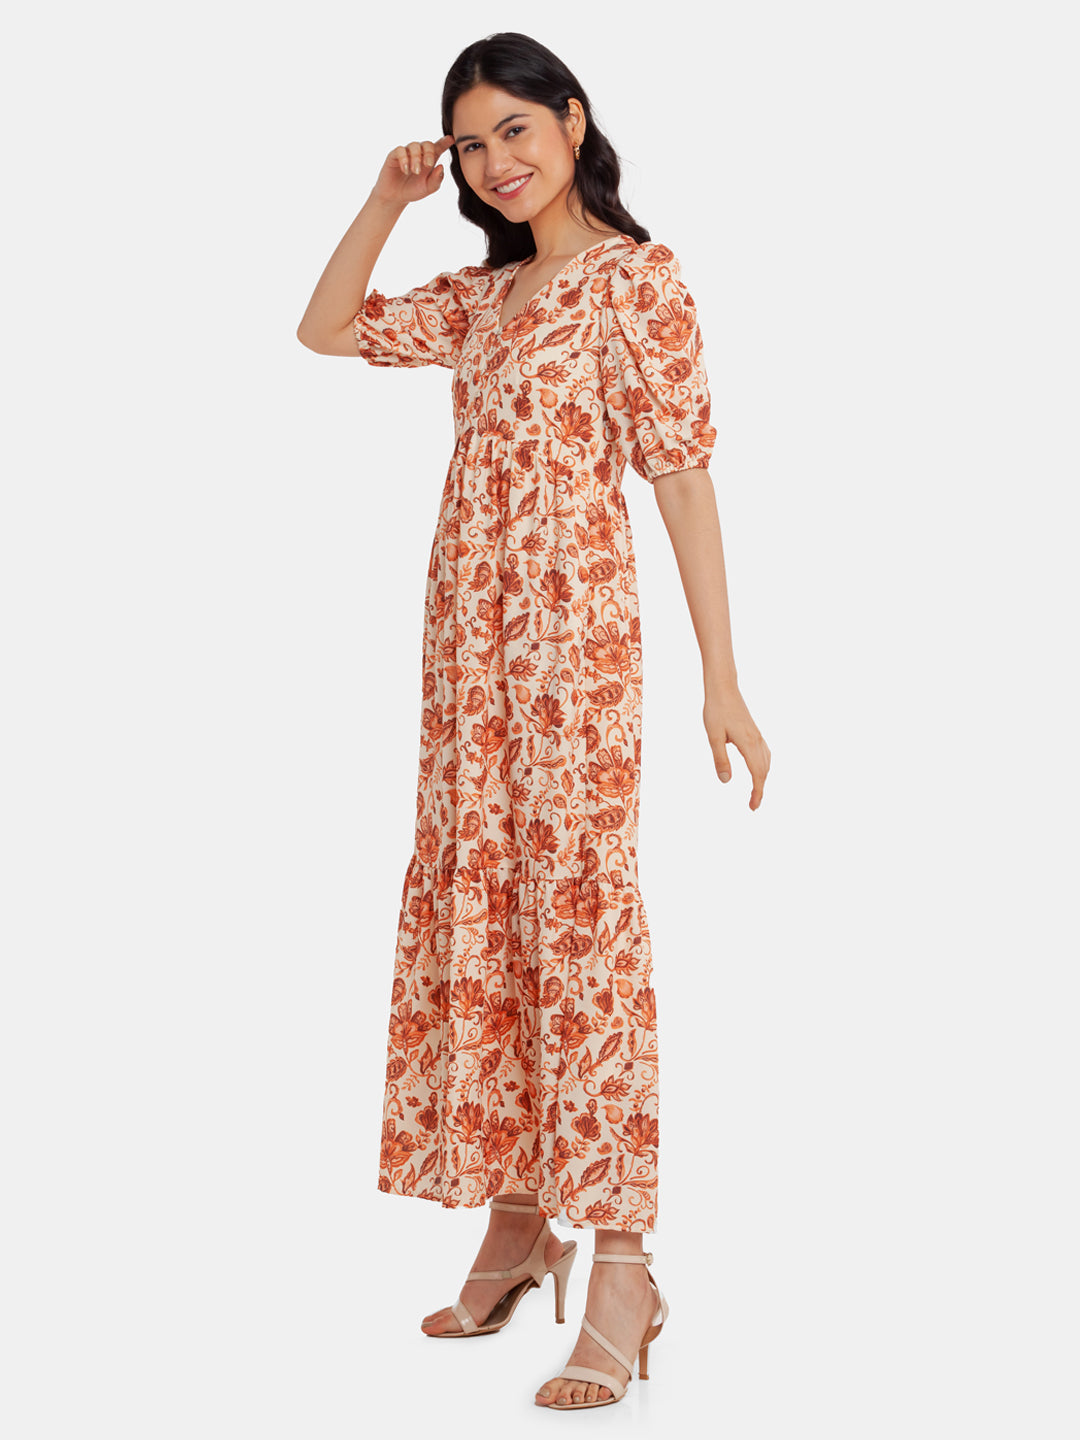 Beige Printed Empire Maxi Dress For Women